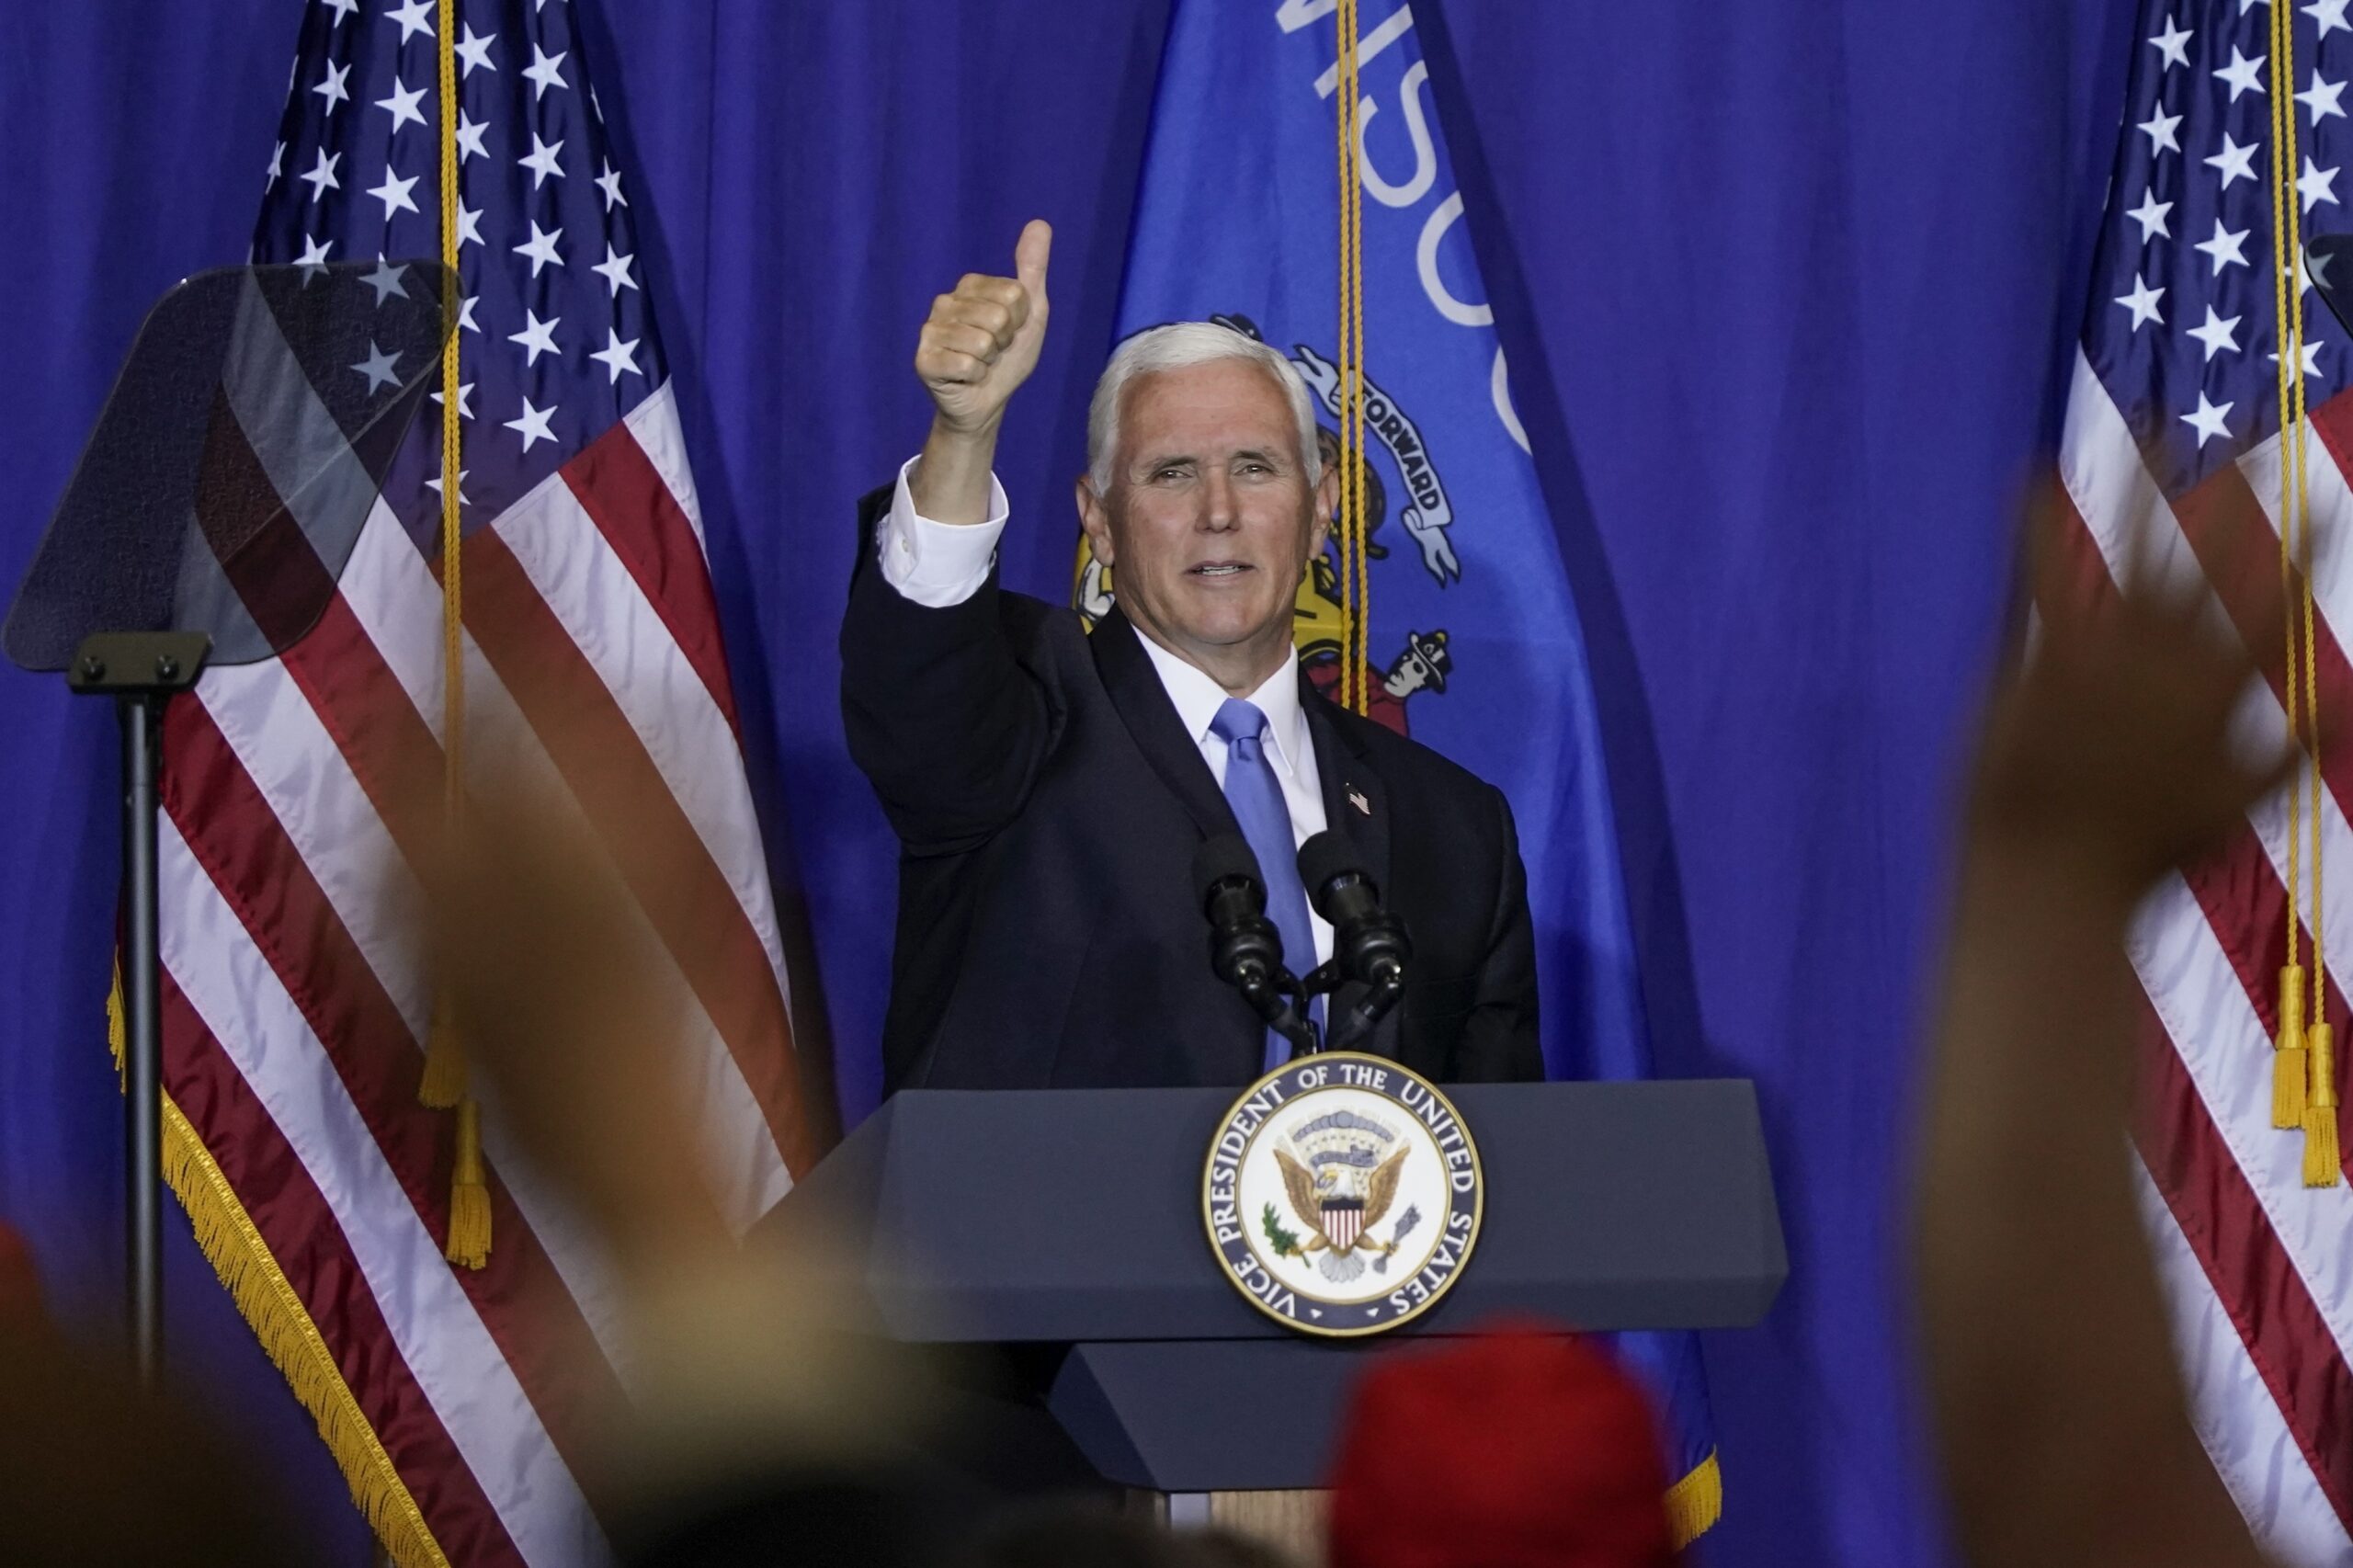 Vice President Mike Pence speaks at a campiagn stop in Janesville